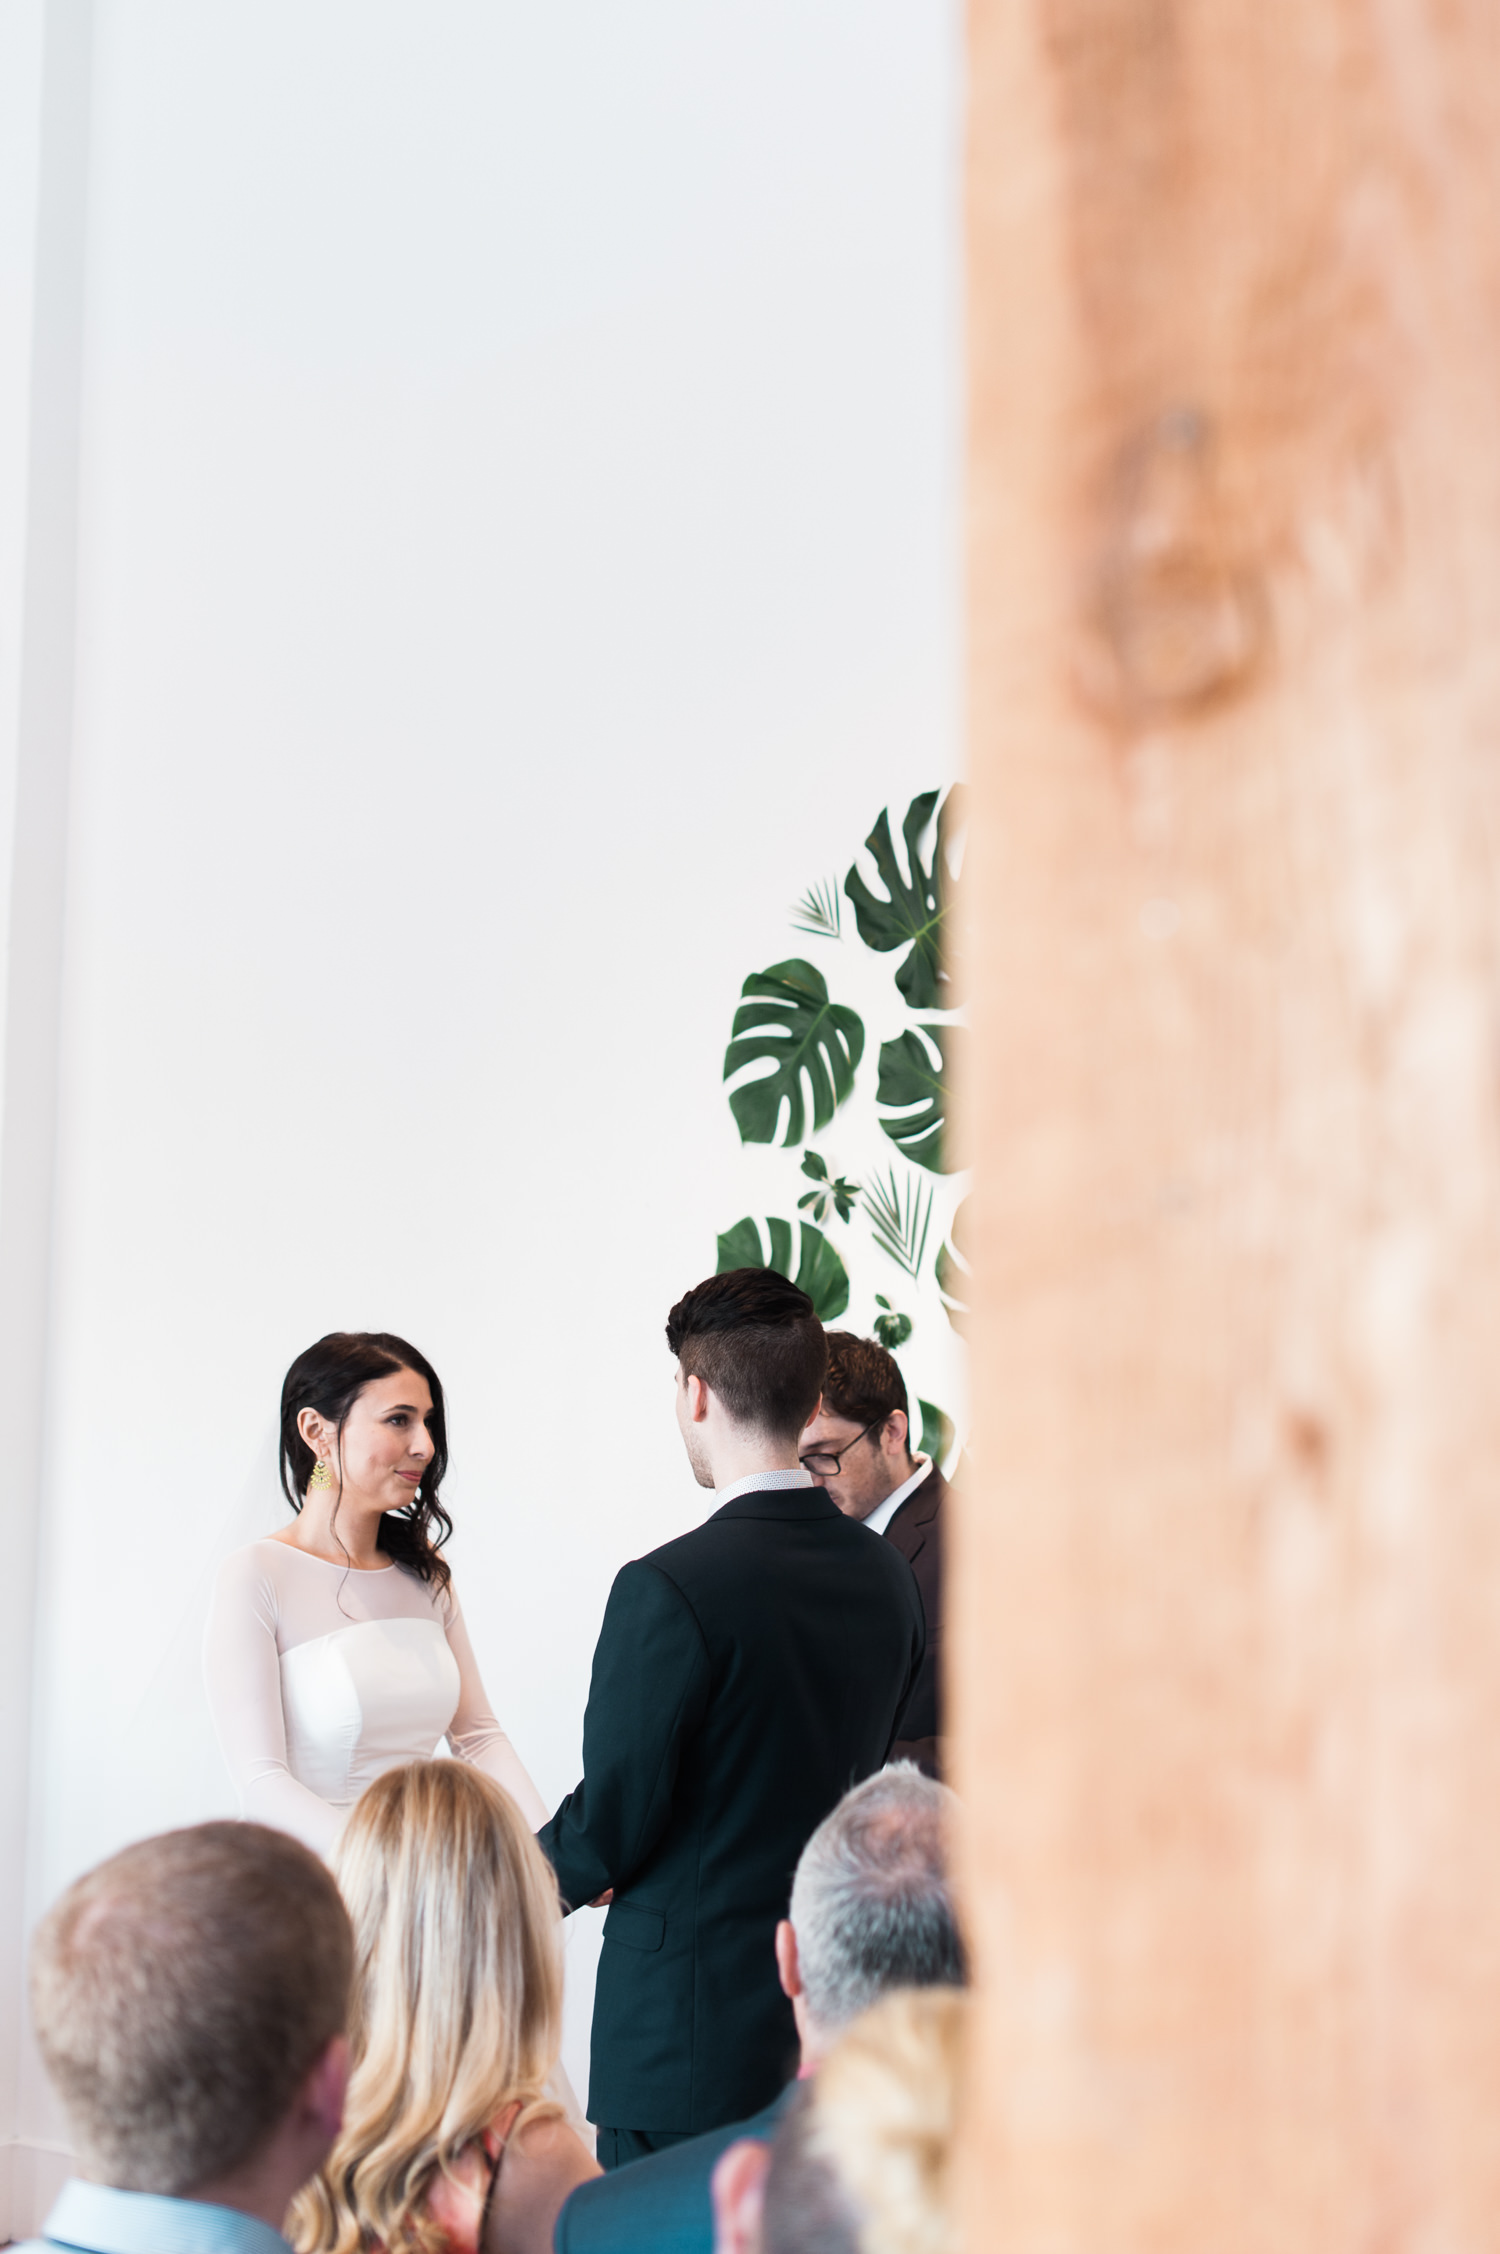 Beautiful ceremony at The Cleaners. by Ace Hotel wedding photographer Briana Morrison